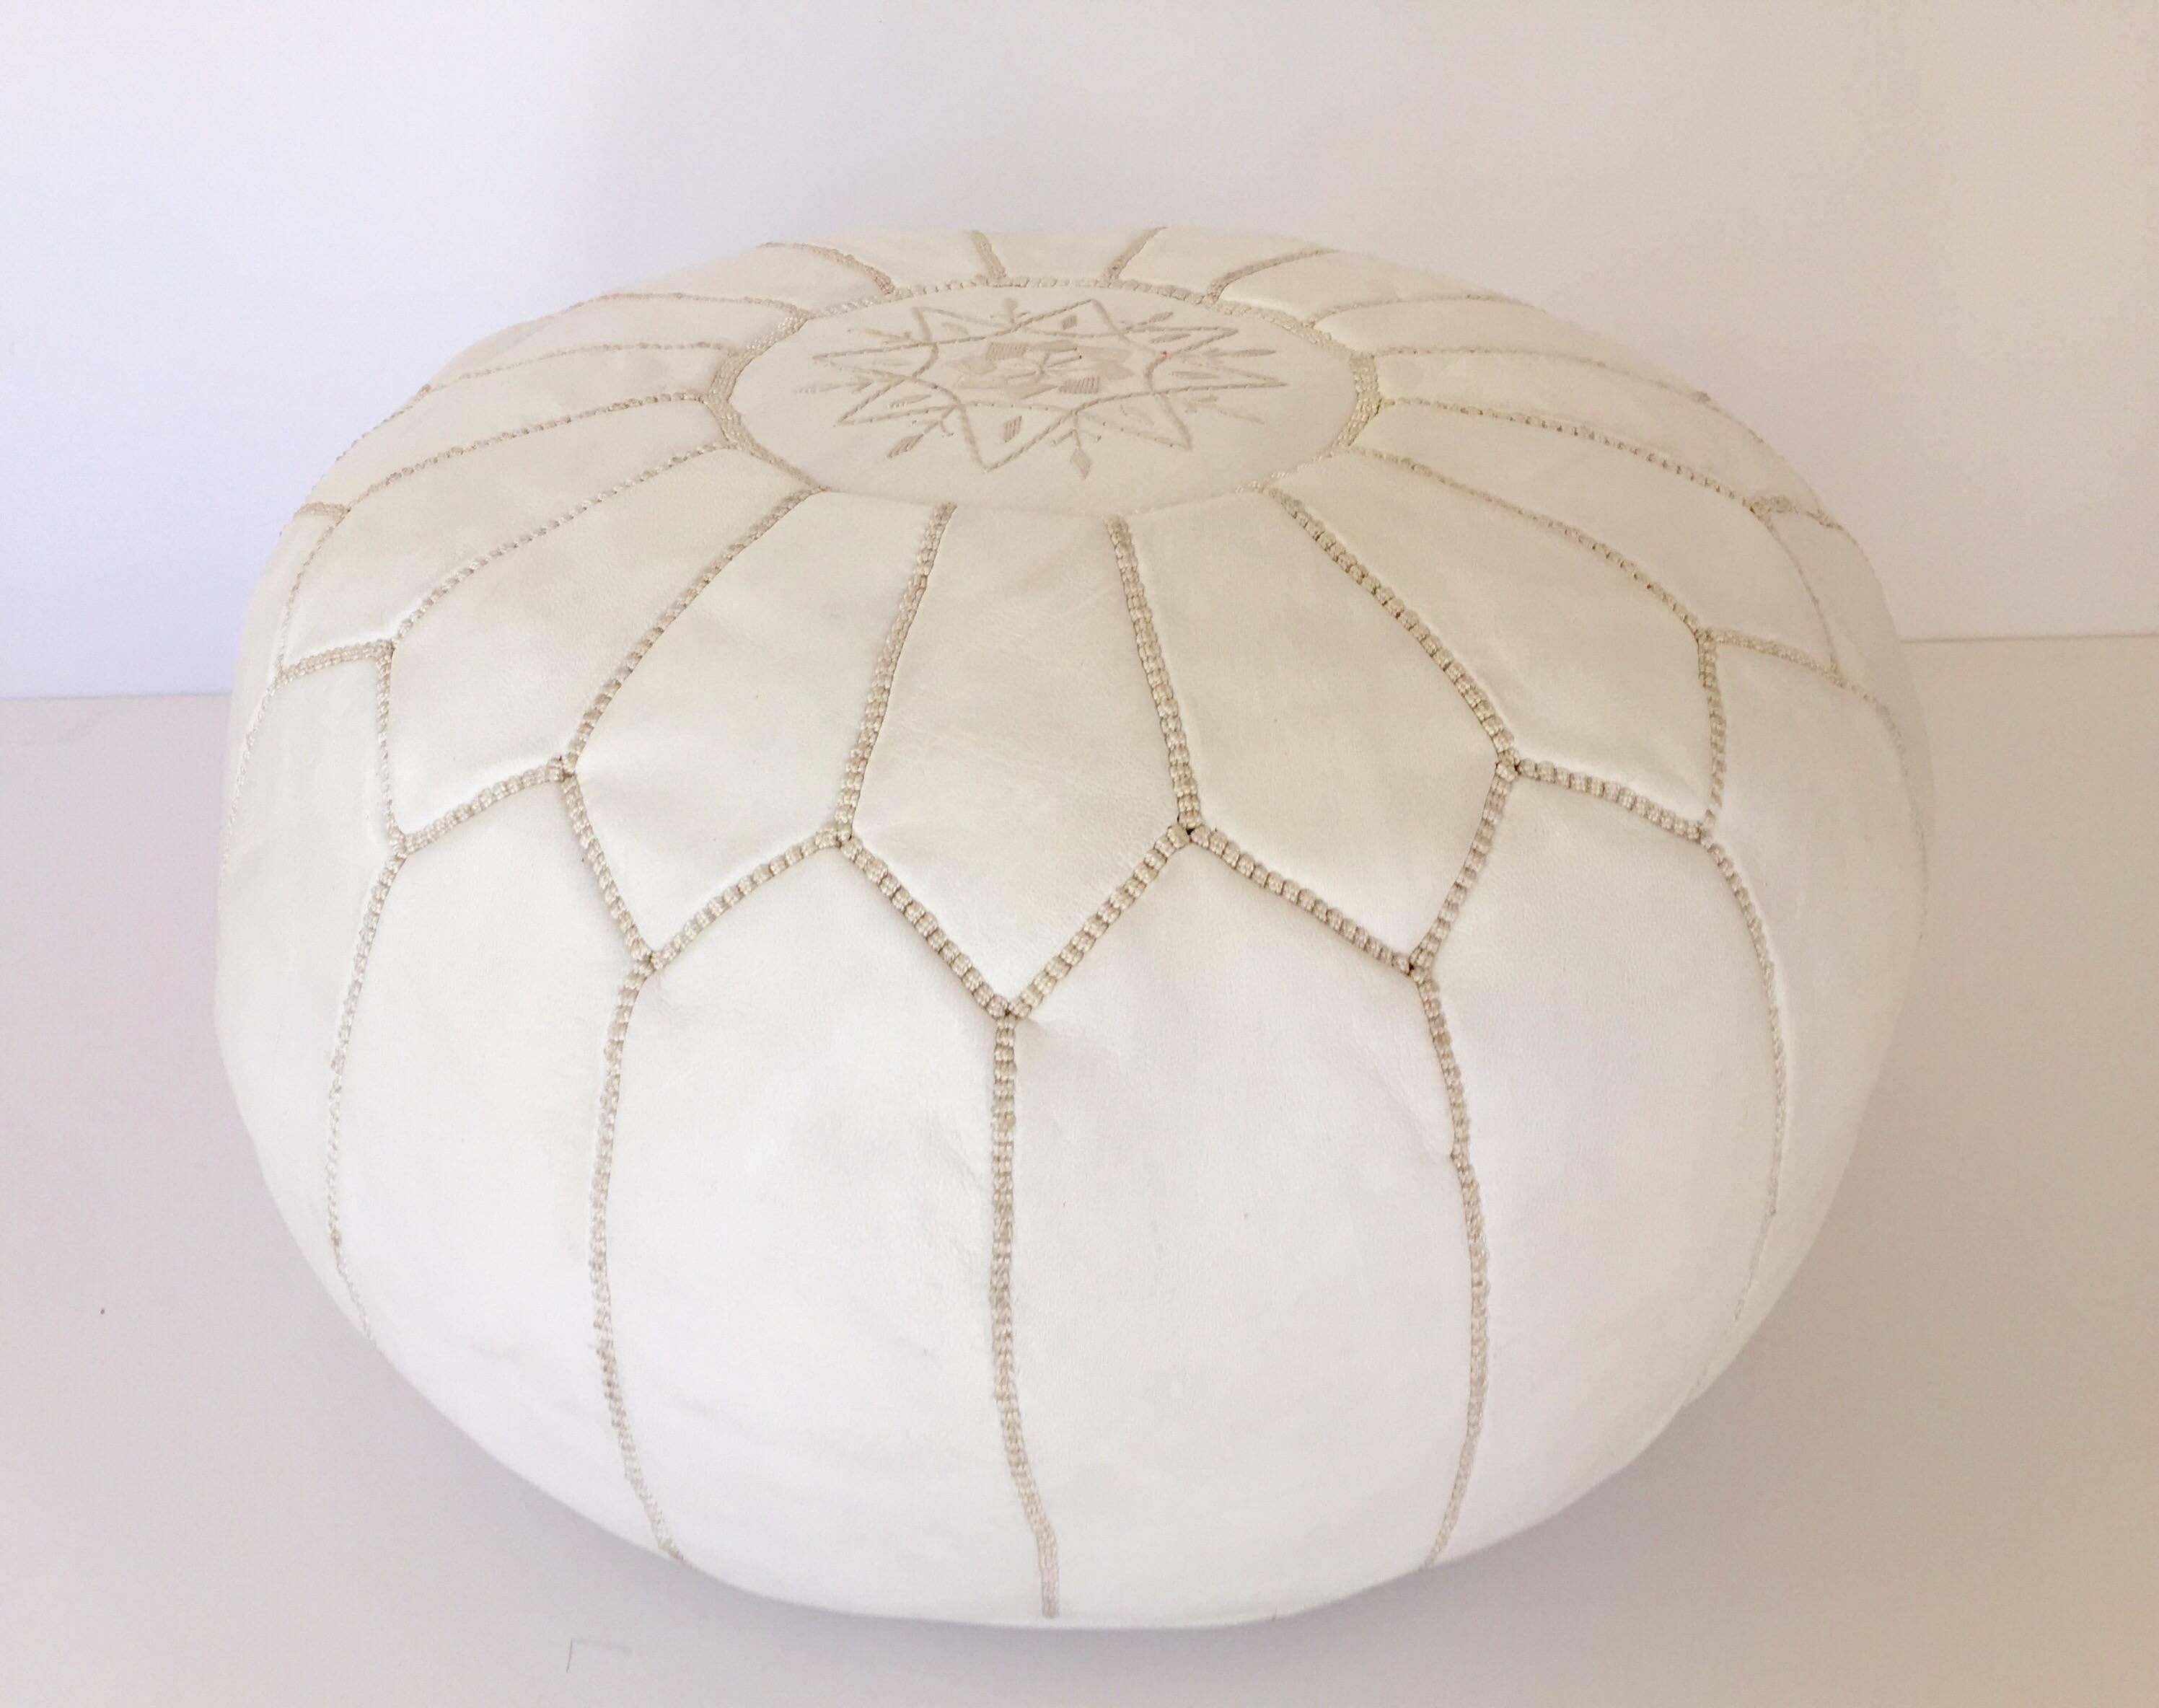 Vintage Moroccan white color round pouf hand tooled and embroidered in Marrakesh.
Beautiful geometrical designs are hand-stitched on this Moroccan stool by expert Artisan.
Use these round handcrafted poufs as ottoman or accent side table, they